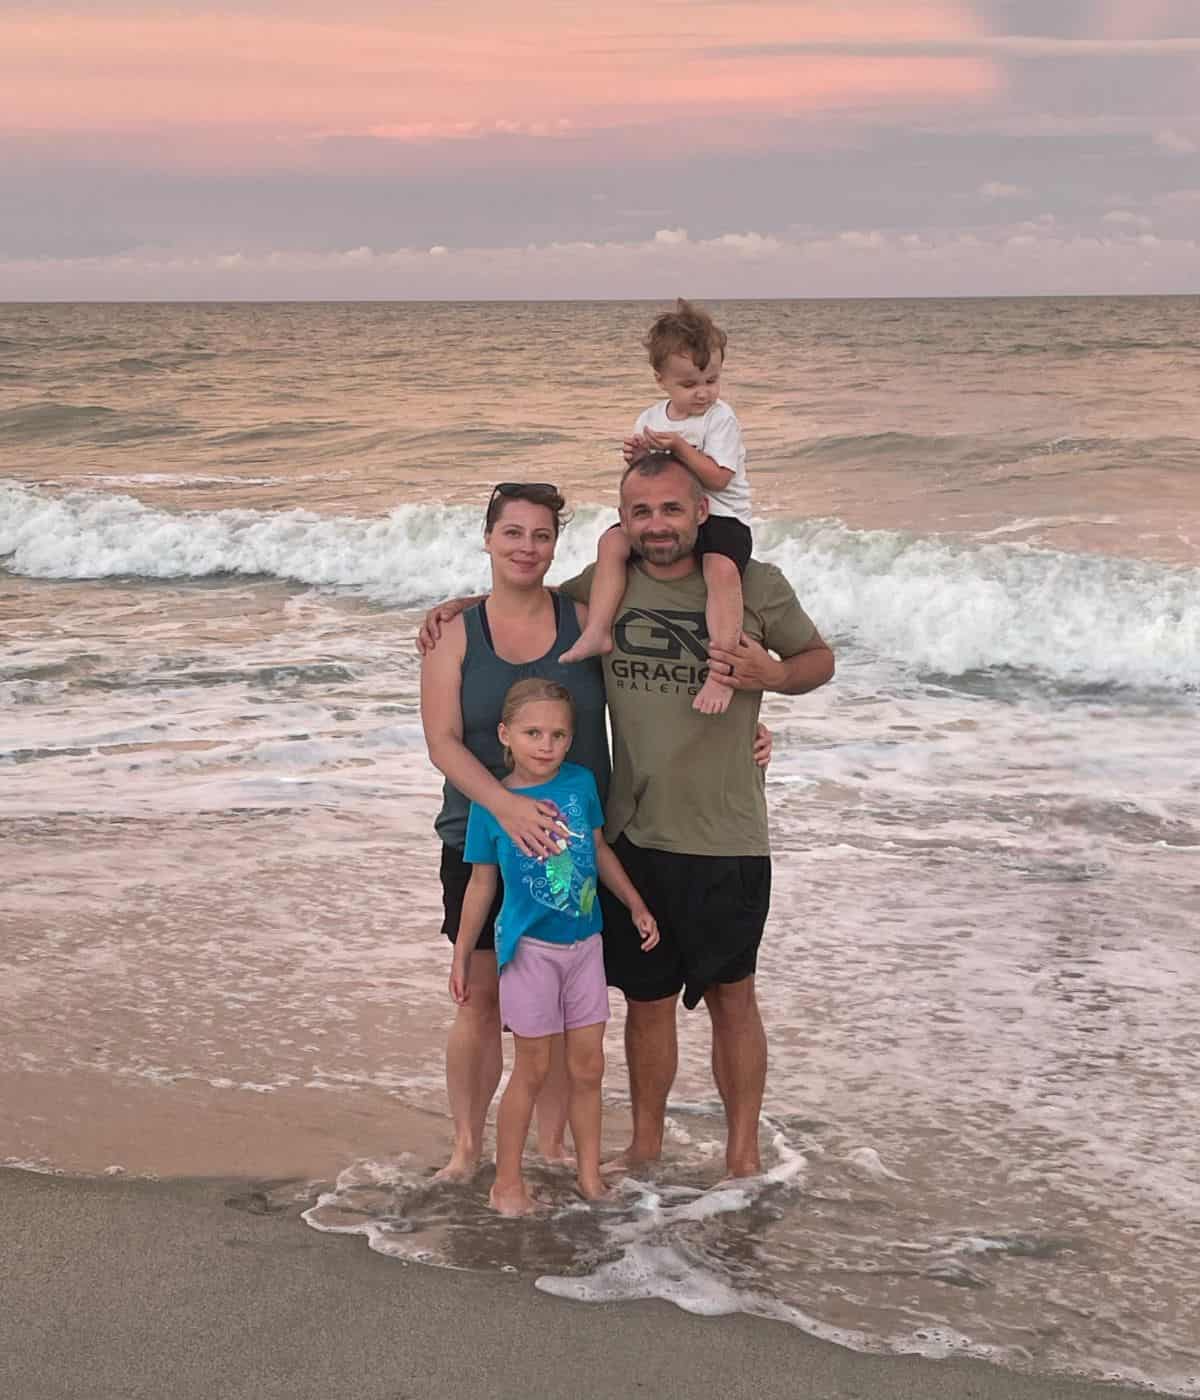 A photo of Alicia with her husband and 2 kids at the beach.